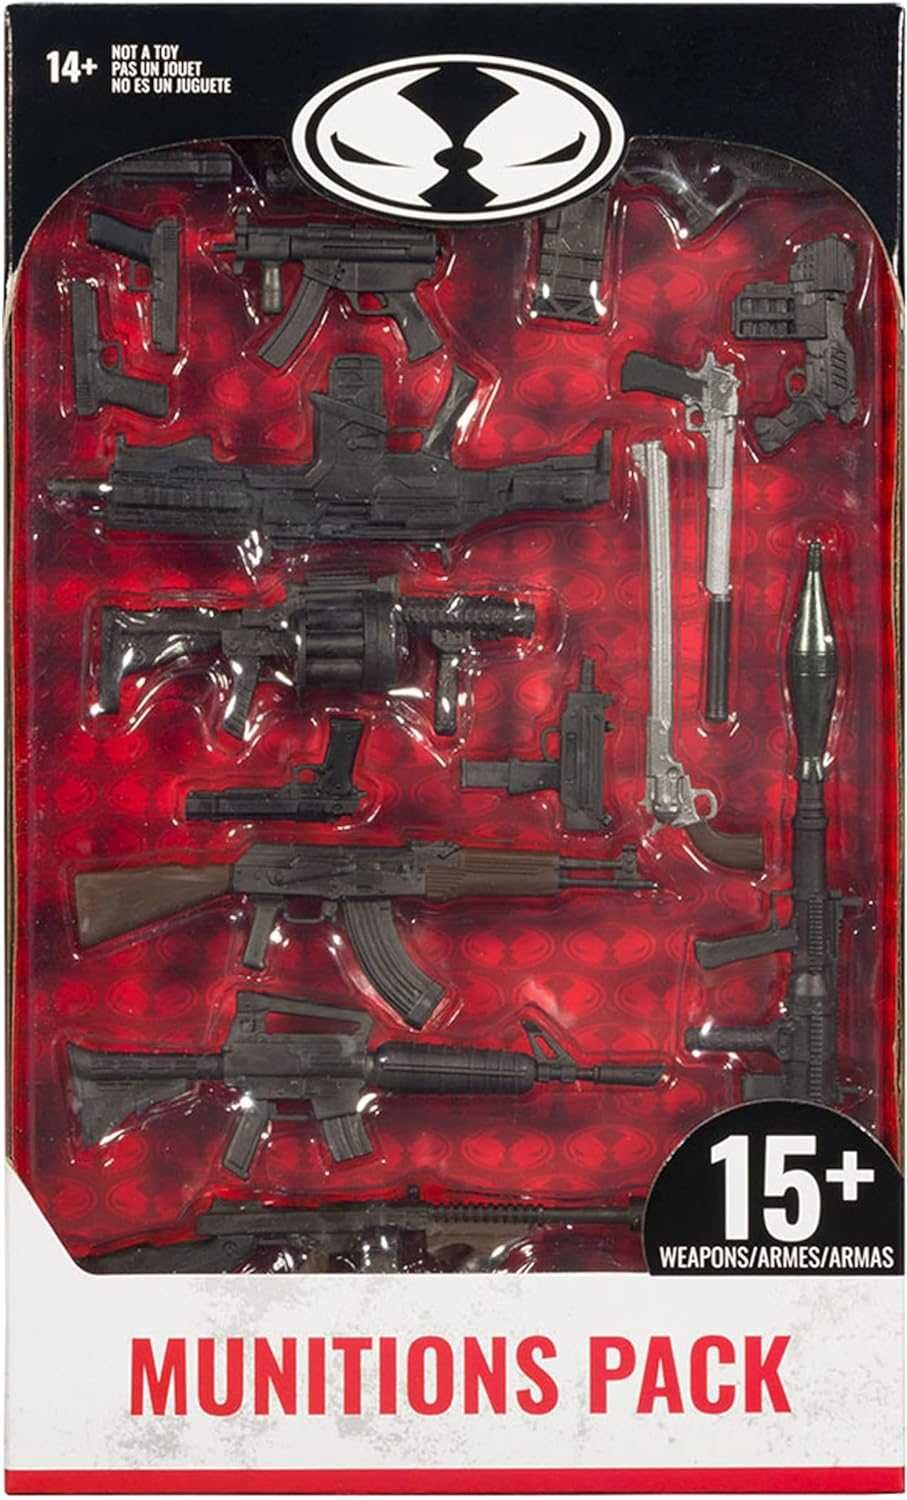 Mcfarlane Toys accessory pack 1 ct of 15 munition pack